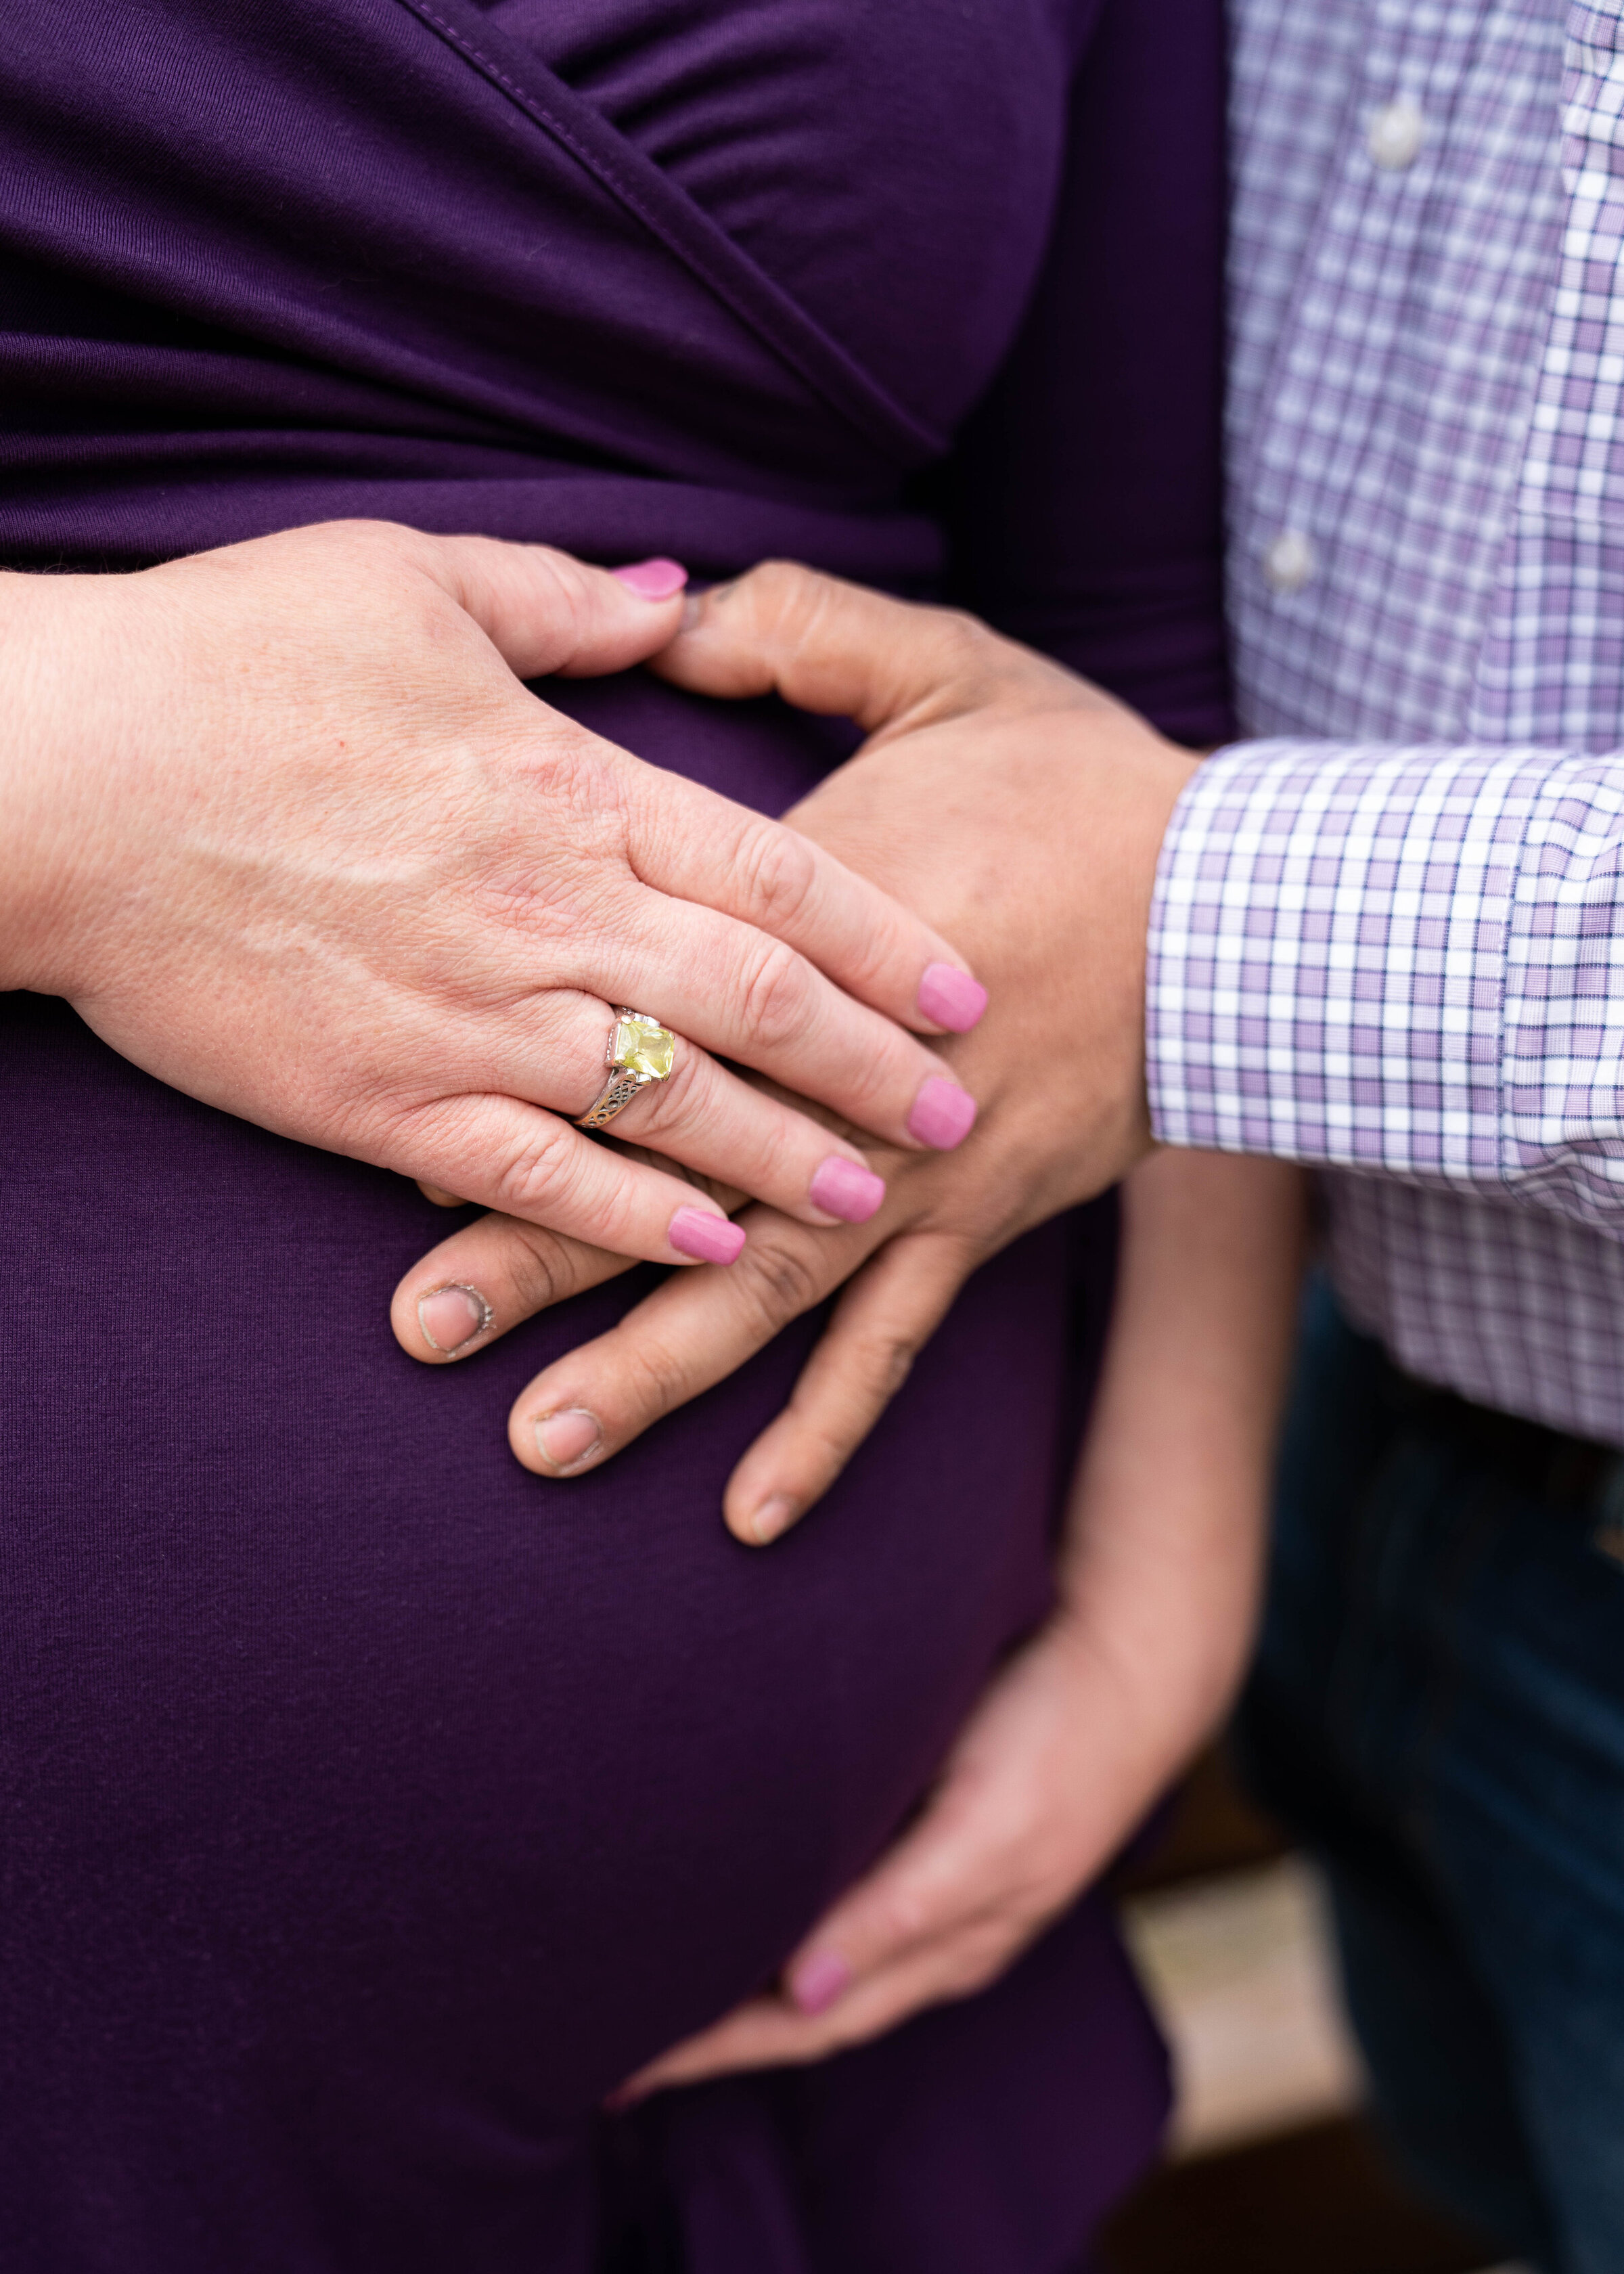 Couples places their hands on the woman's baby belly